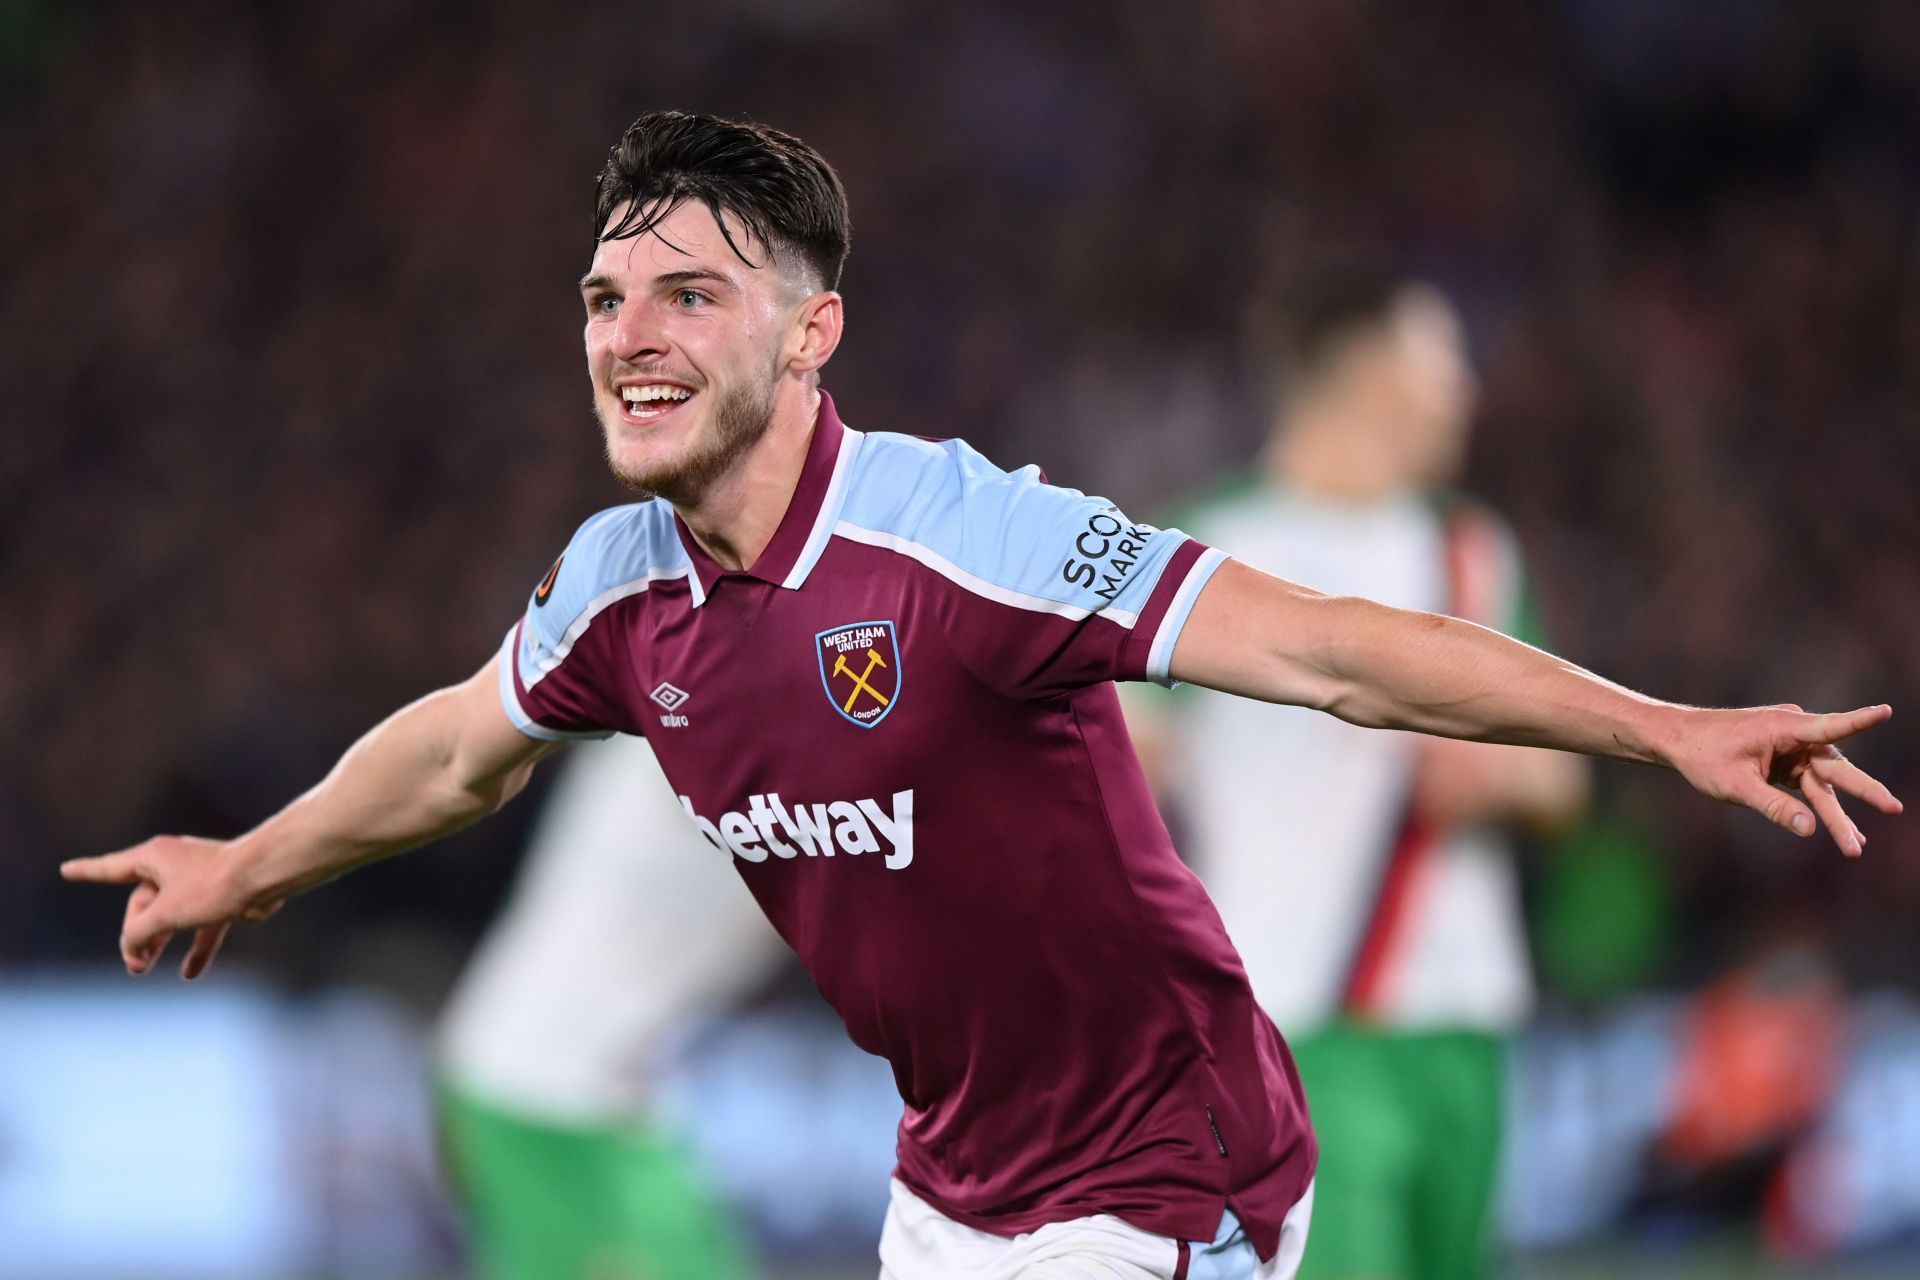 Jack Wilshere has advised Declan Rice to stay at West Ham United despite interest from Chelsea.